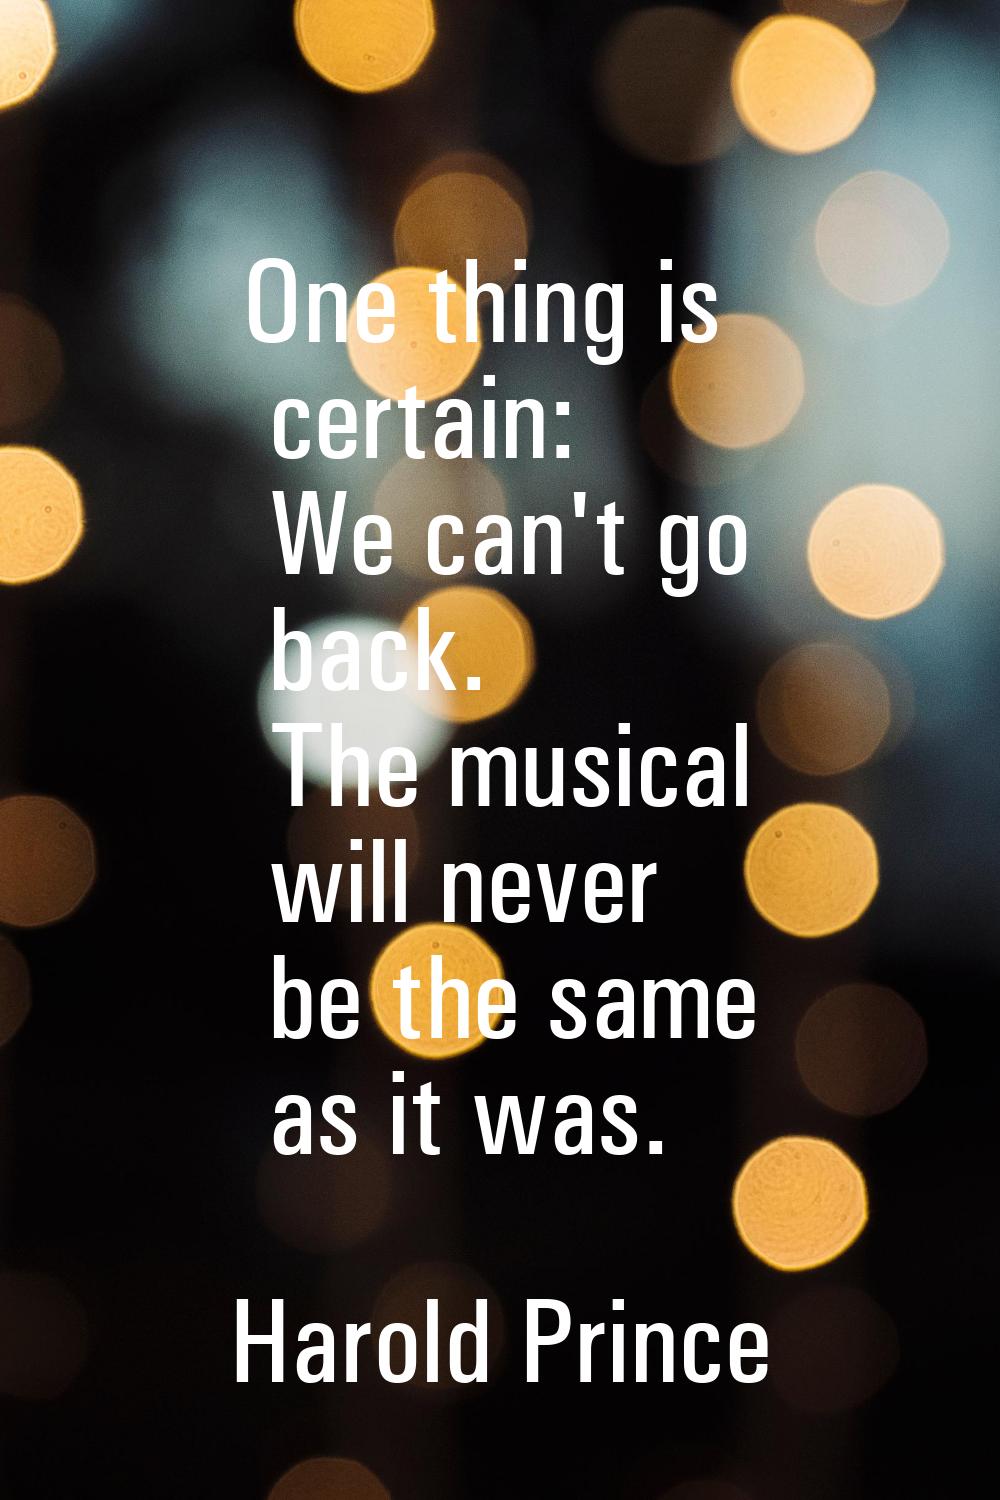 One thing is certain: We can't go back. The musical will never be the same as it was.